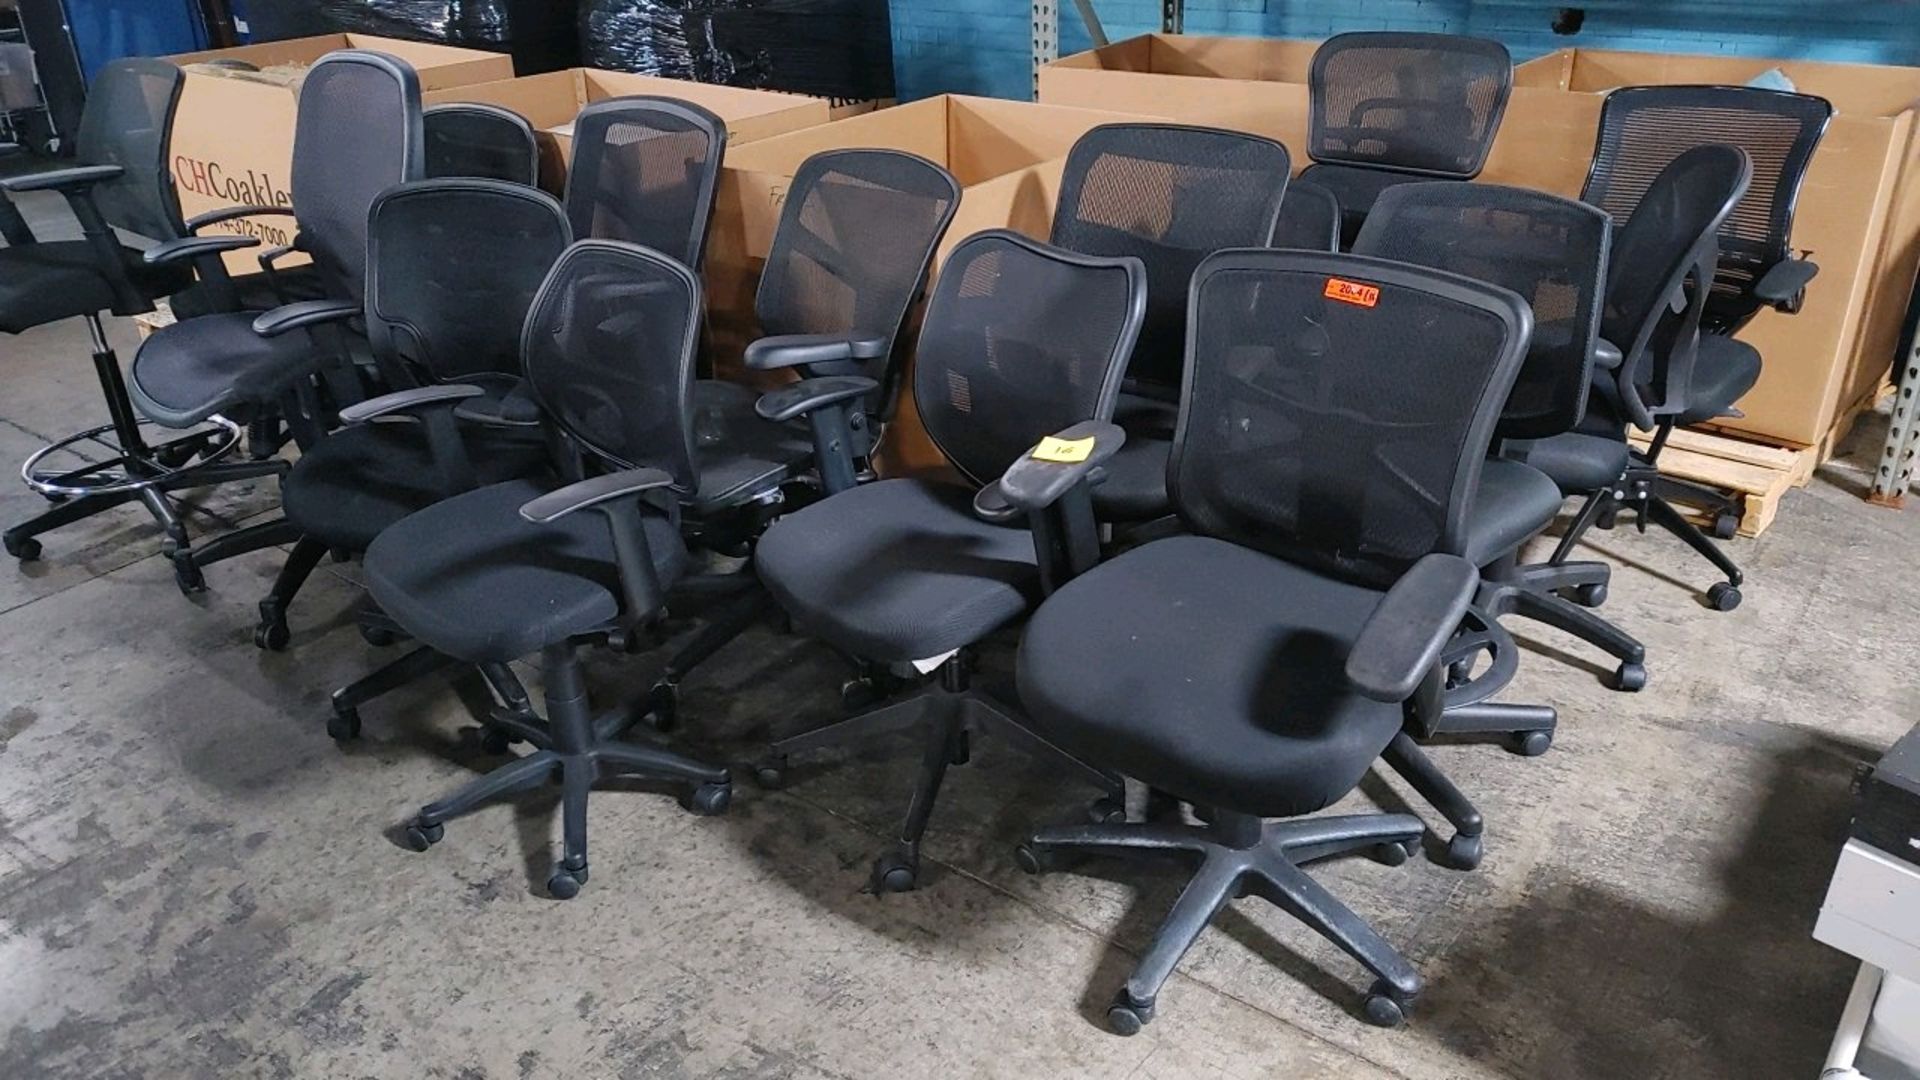 VARIOUS TASK OFFICE CHAIRS ON WHEELS QTY: 16, LOCATED: 3821 N. FRATNEY STREET MILWAUKEE, WI 53212